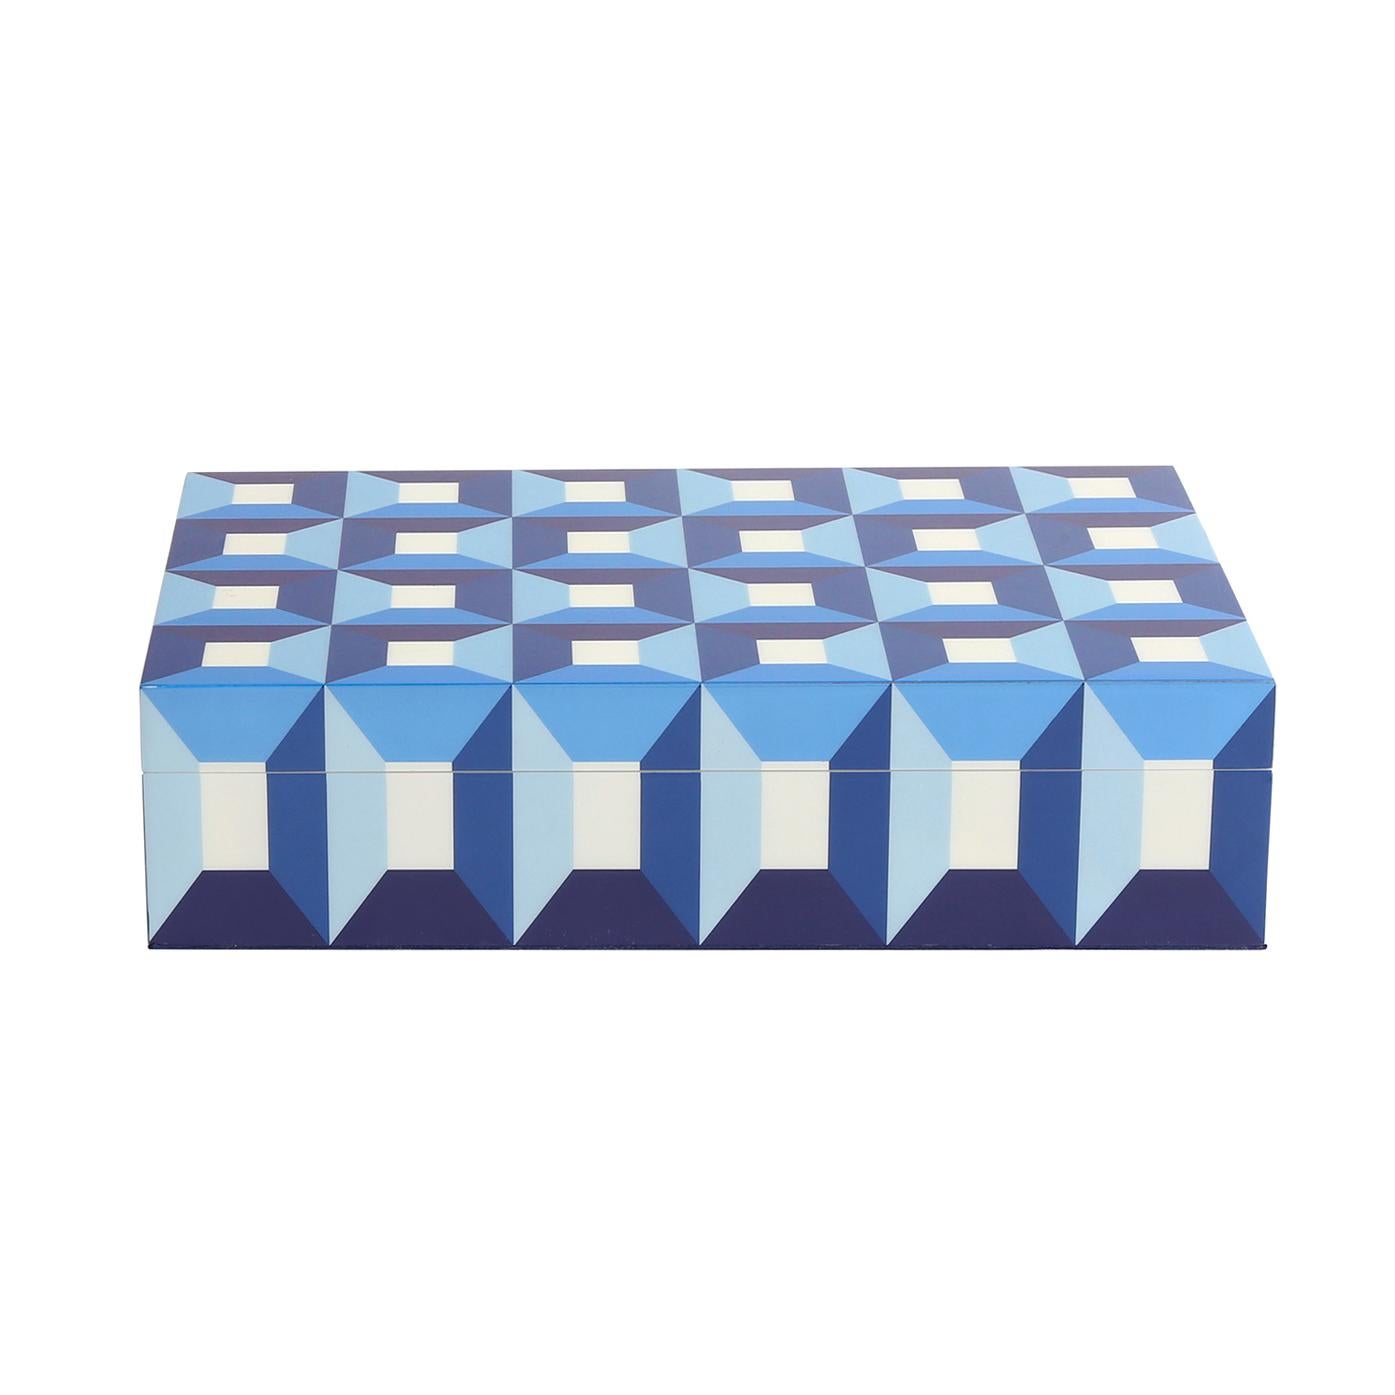 Luxe lacquer. Featuring hand-finished patterns in glossy lacquer, our Sorrento lacquer boxes bring brilliant blue hues and trippy dimensionality to your shelf, mantel, or tablescape. Keep your possessions handy but hidden. Three sizes for stashing,